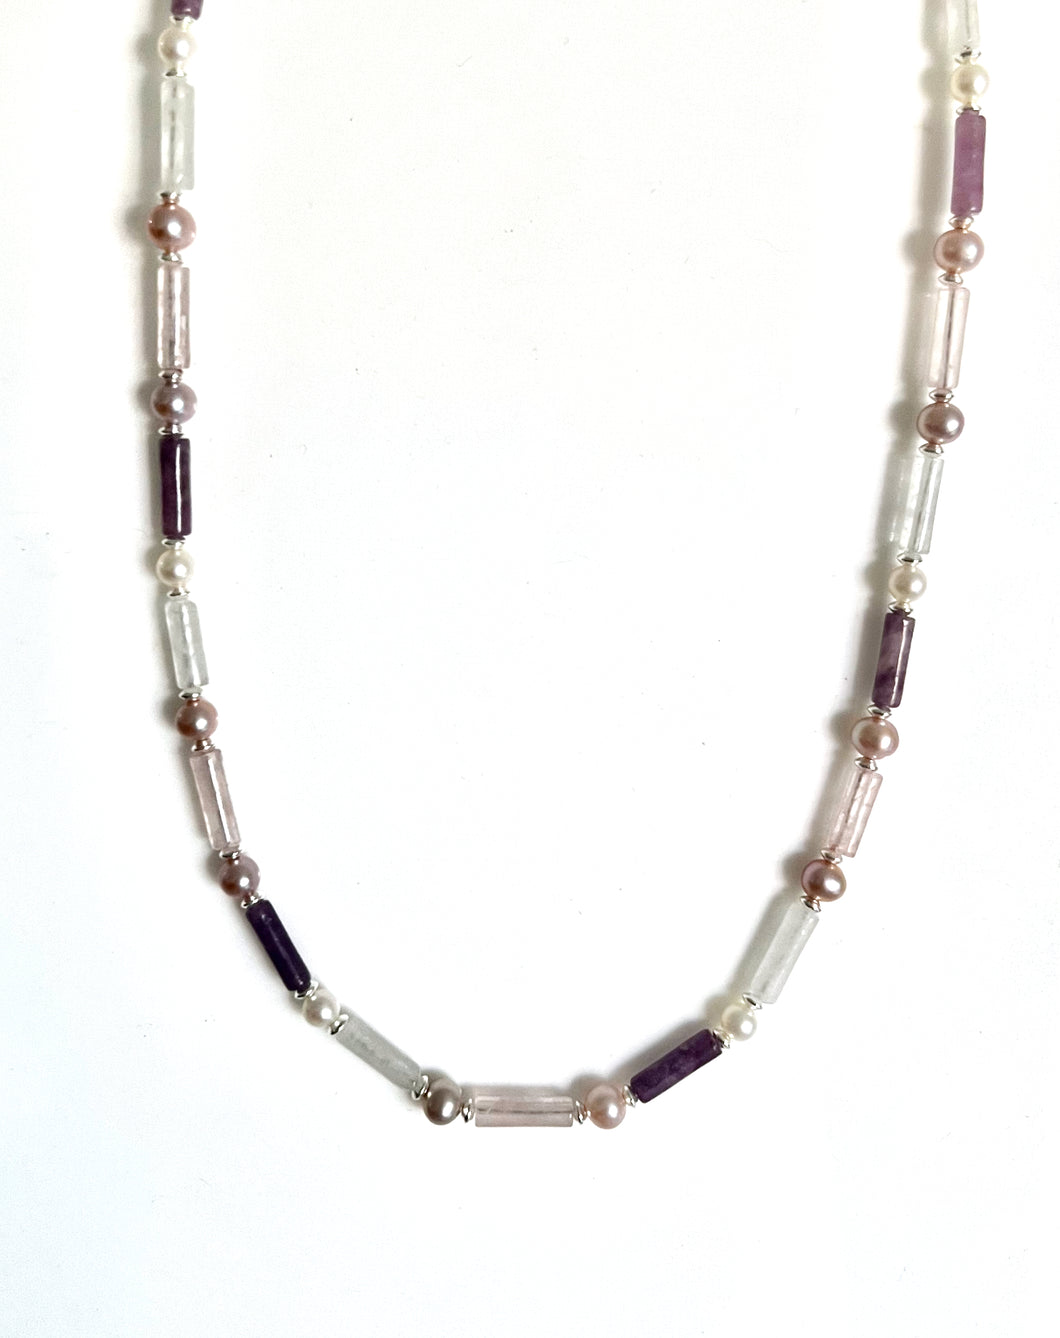 Australian Handmade Pink Necklace with Rose Quartz Crystal Quartz Lepidolite Pearls and Sterling Silver